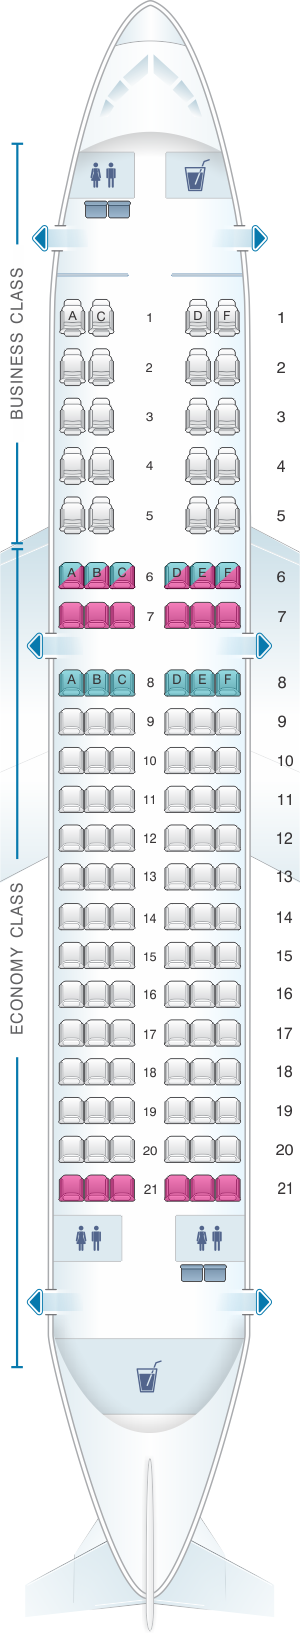 Seat map for Rossiya Airlines Airbus A319 116PAX